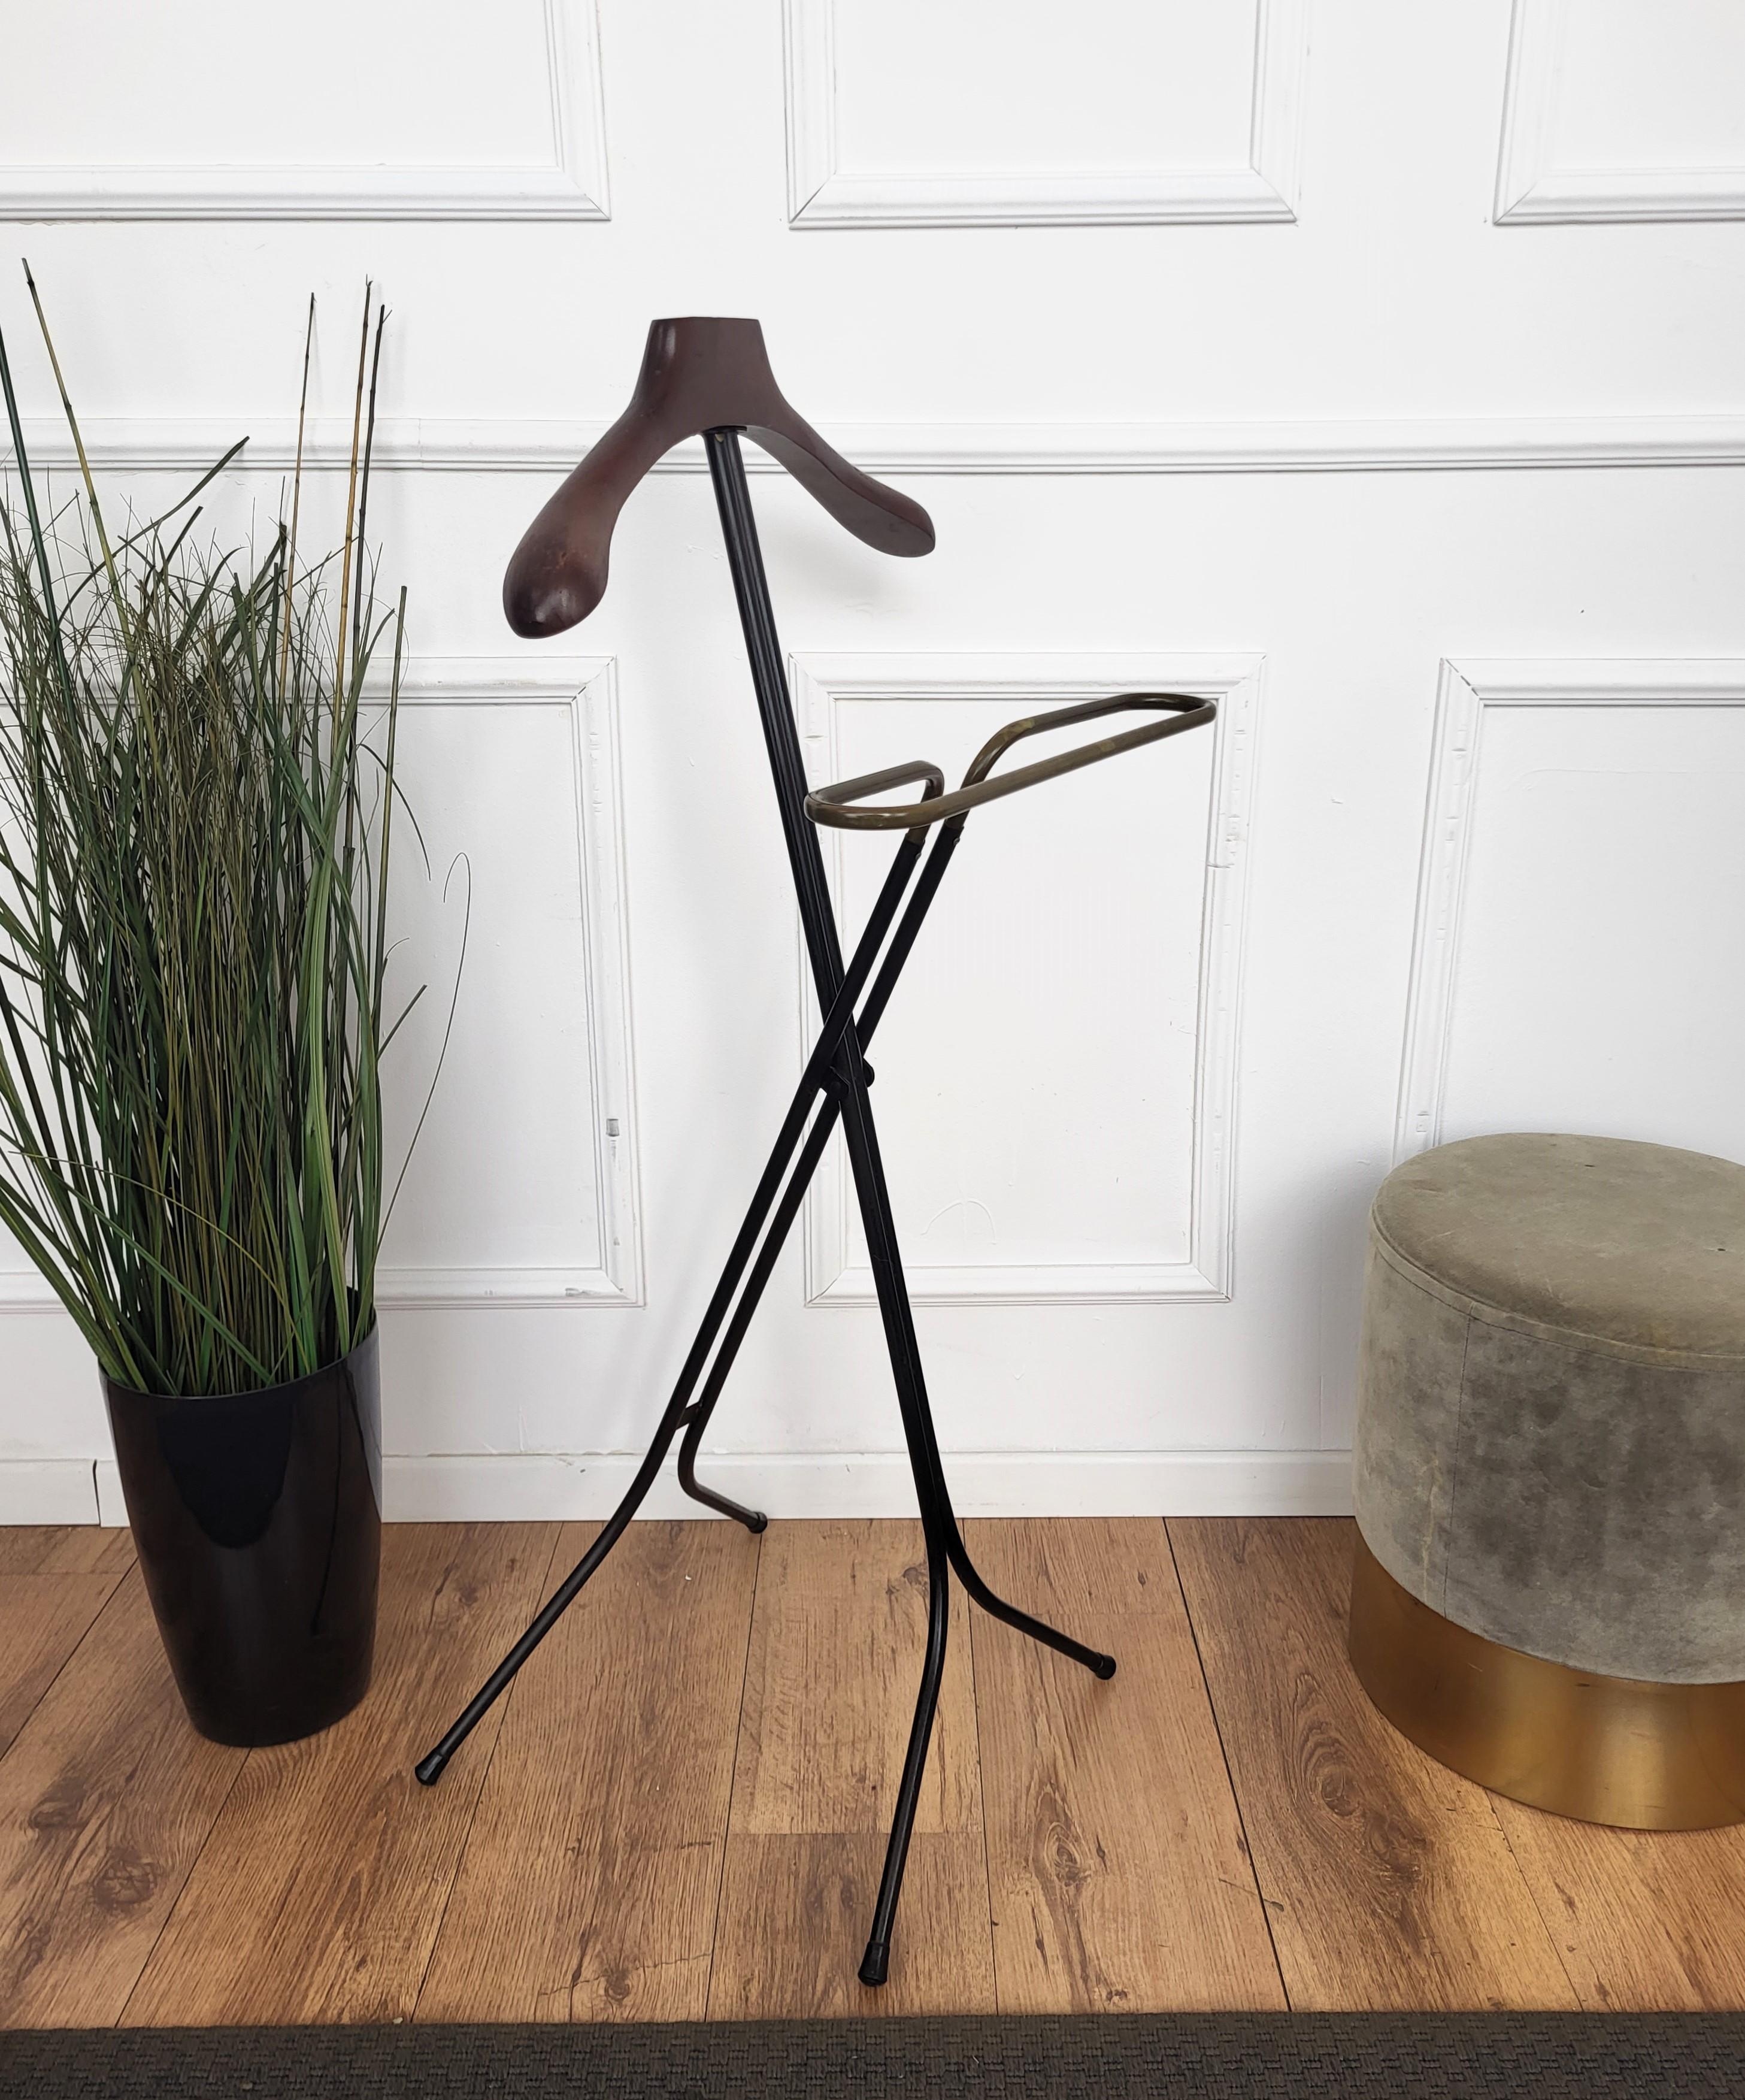 Beautiful vintage valet stand manufactured in Italy in the 1950s by iconic Fratelli Reguitti company with design attributed to Ico Parisi. The folding valet is with beech wood hanger and refined iron and brass frame with small signs of time and use